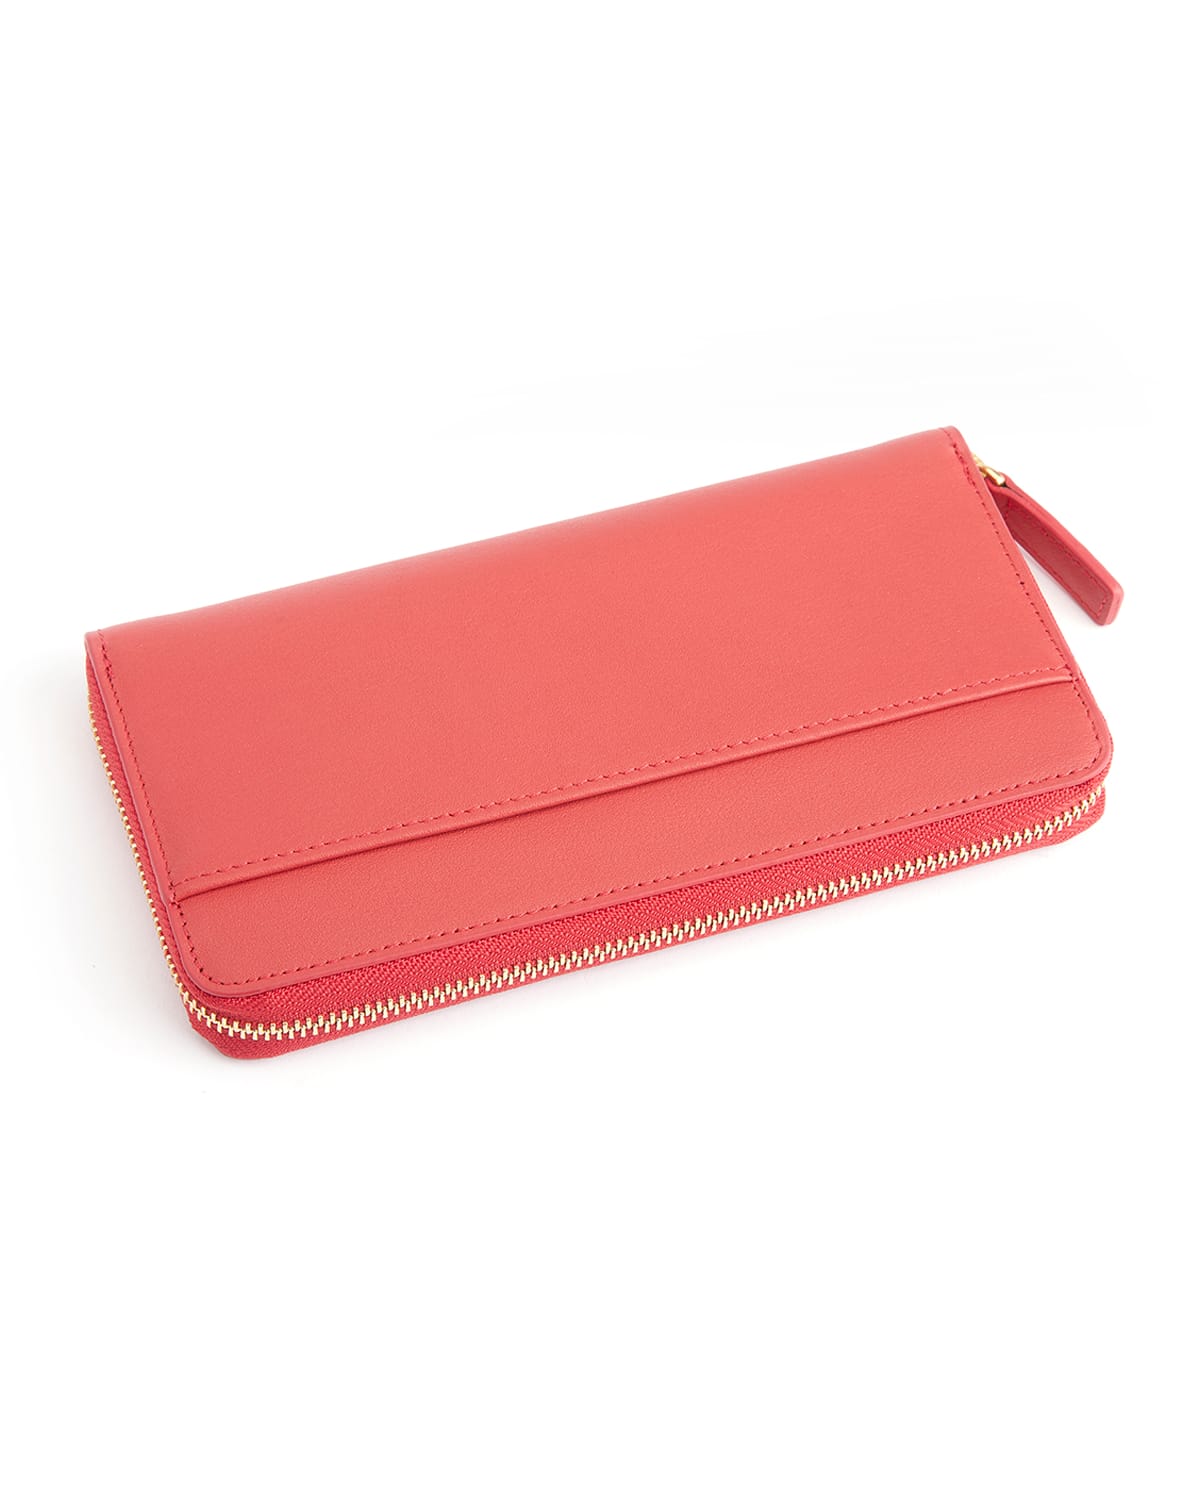 RFID Blocking Continental Wallet, Personalized